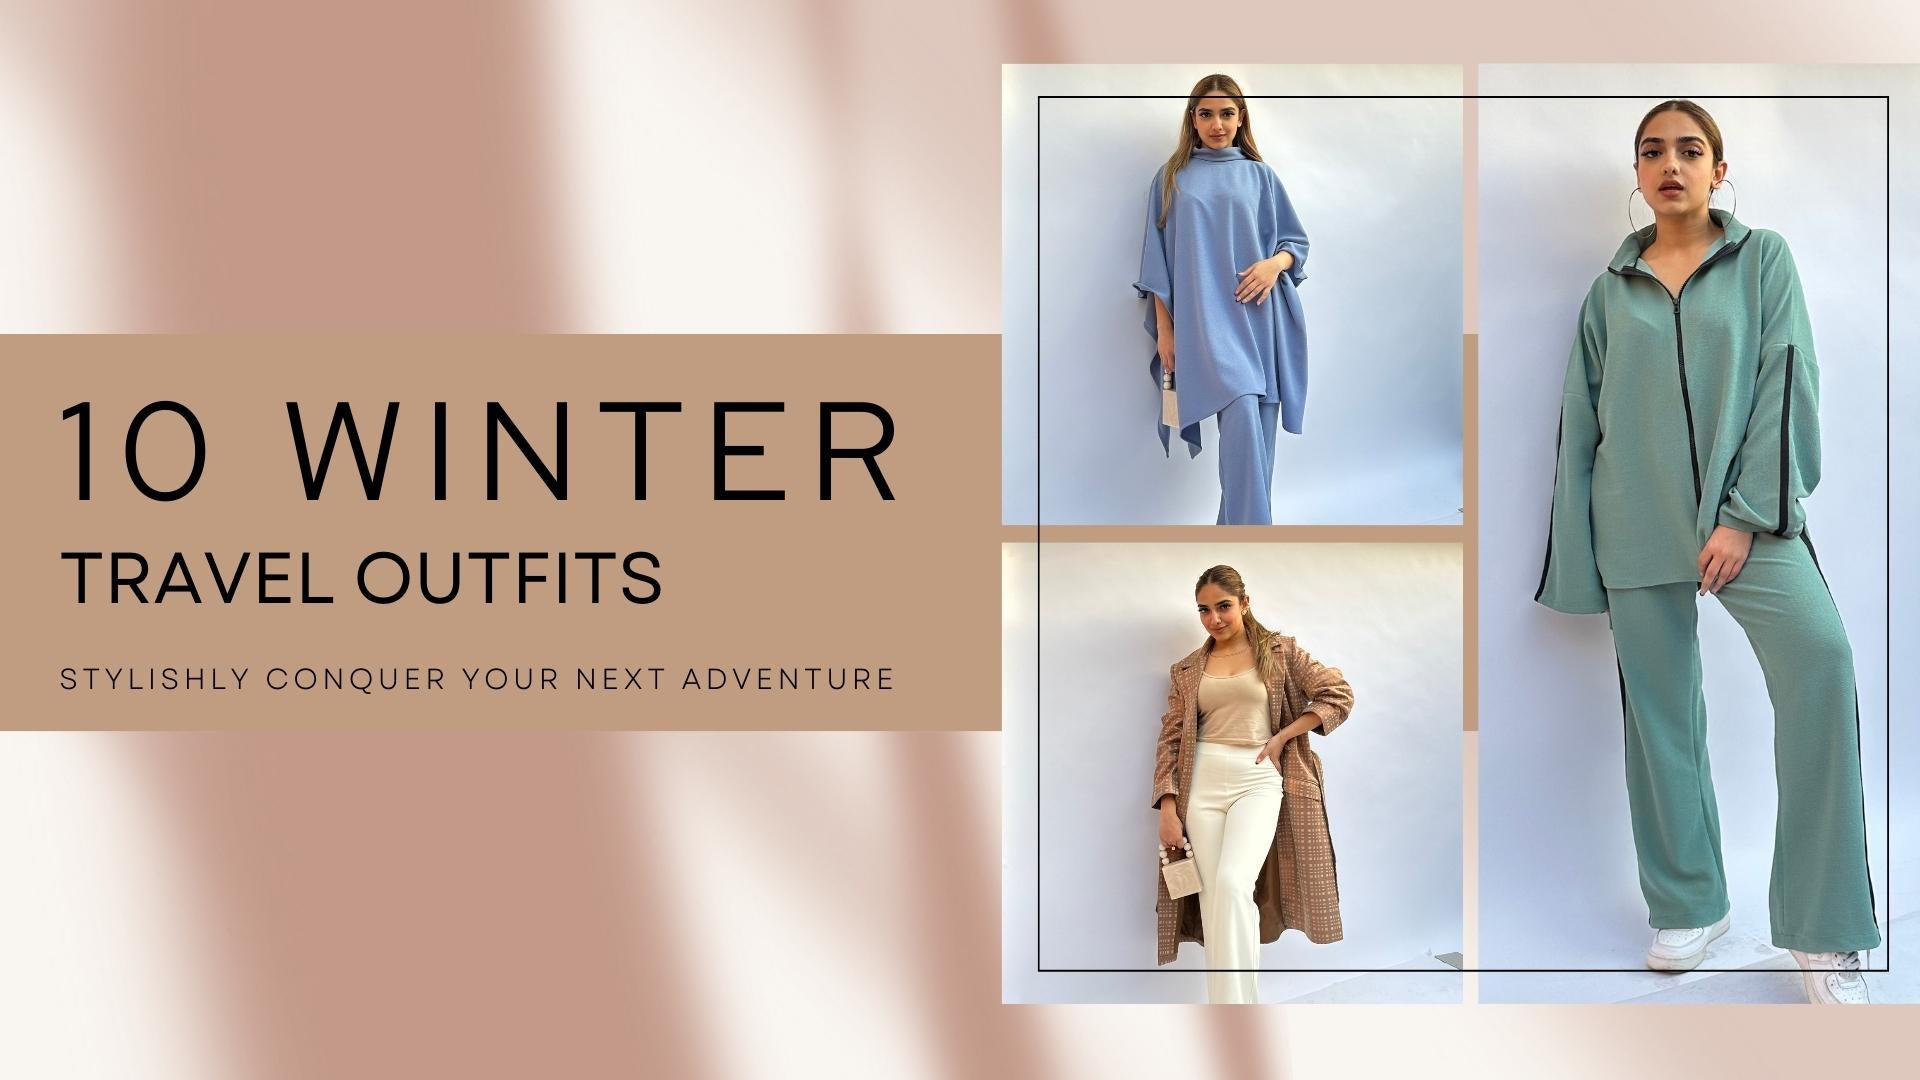 10 Winter Travel Outfits